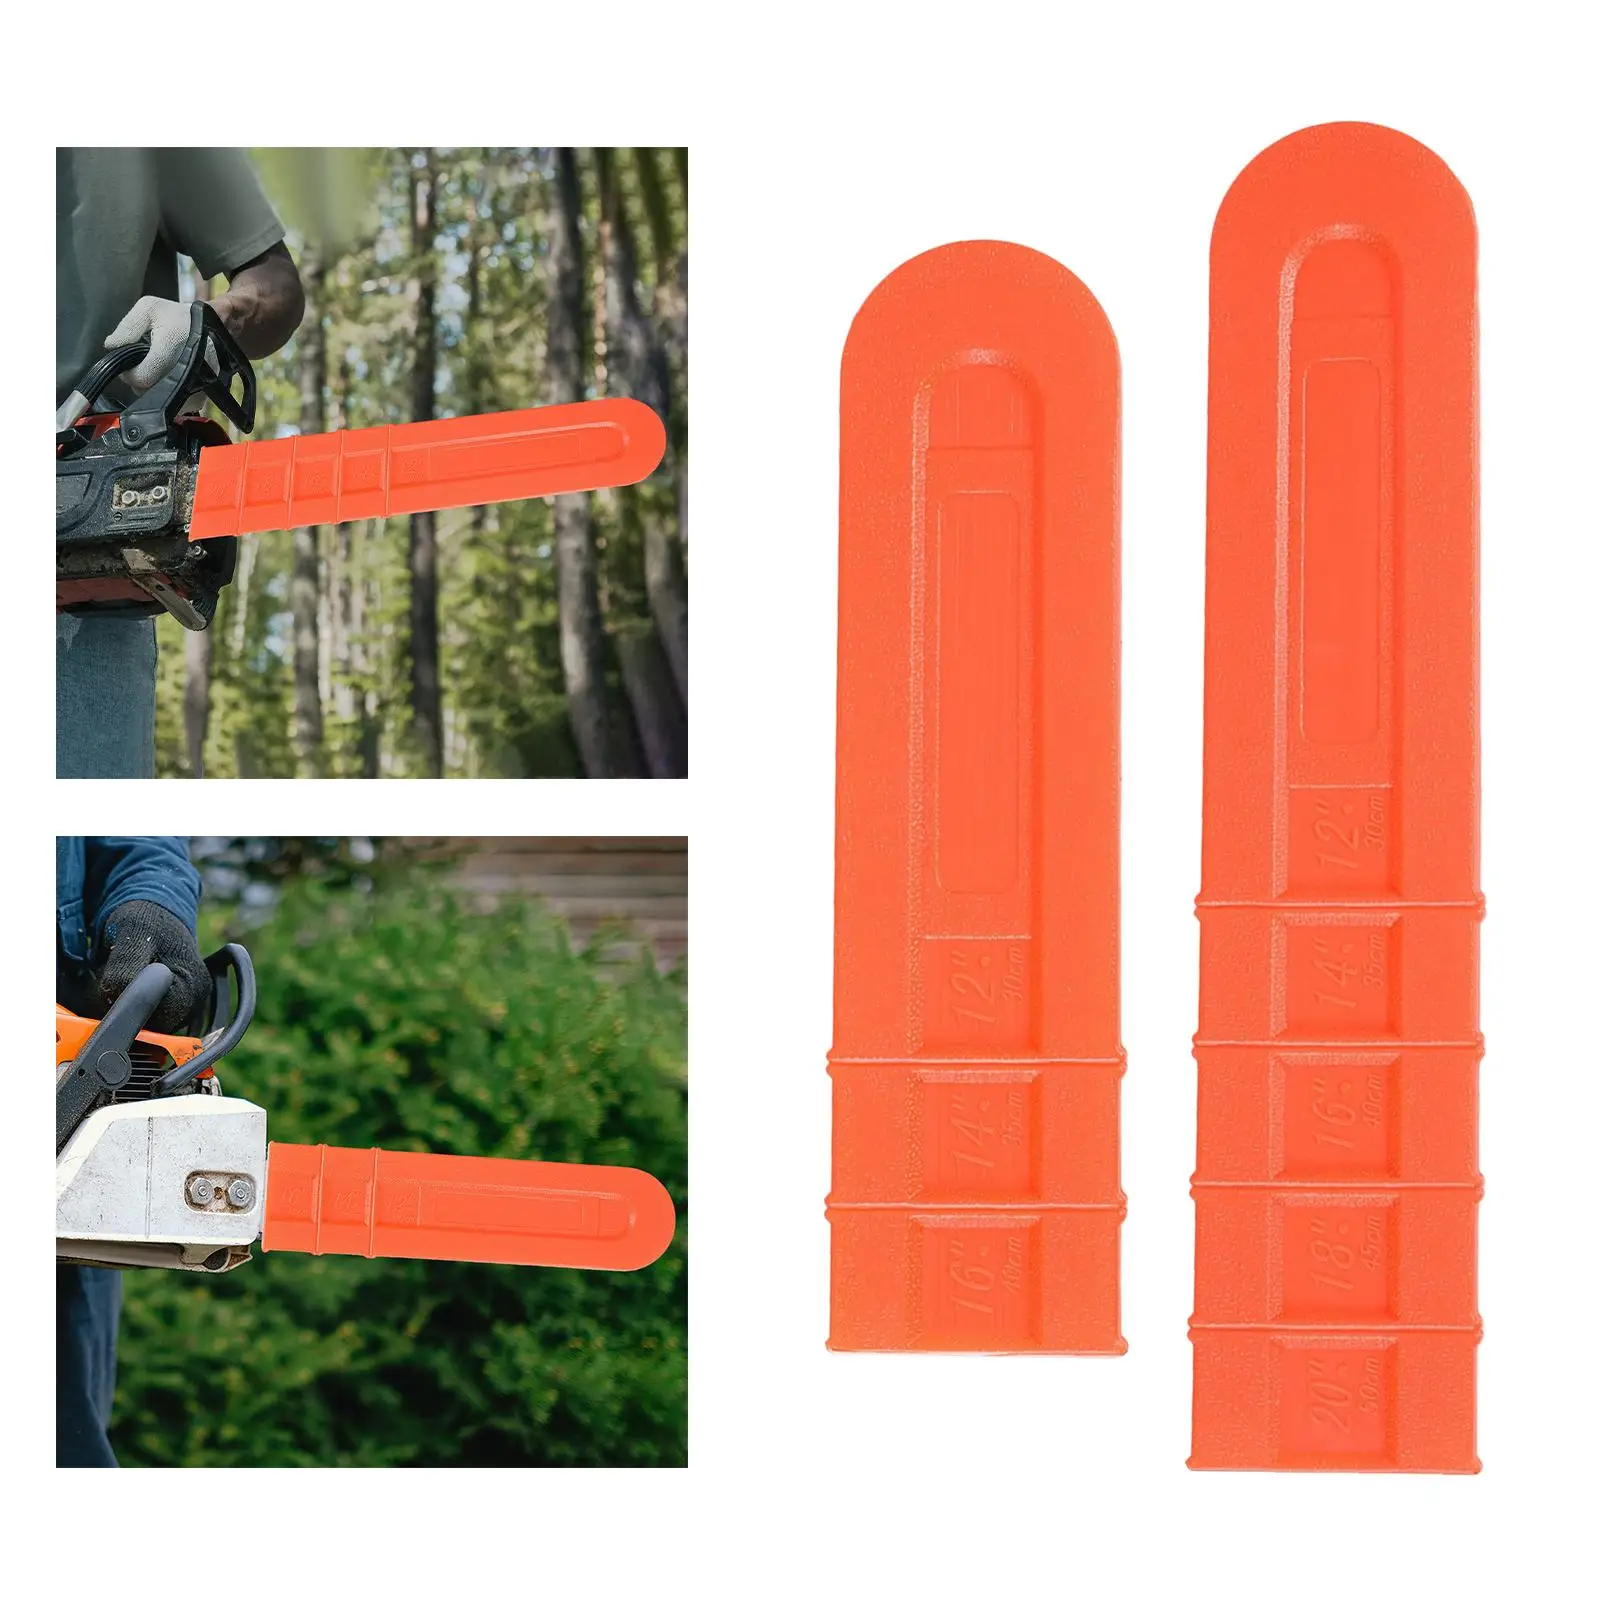 Chainsaw Bar Protective Tools Accessories Guide Plate Accessories Scabbard Guard Chainsaw Saw Cover for Garden